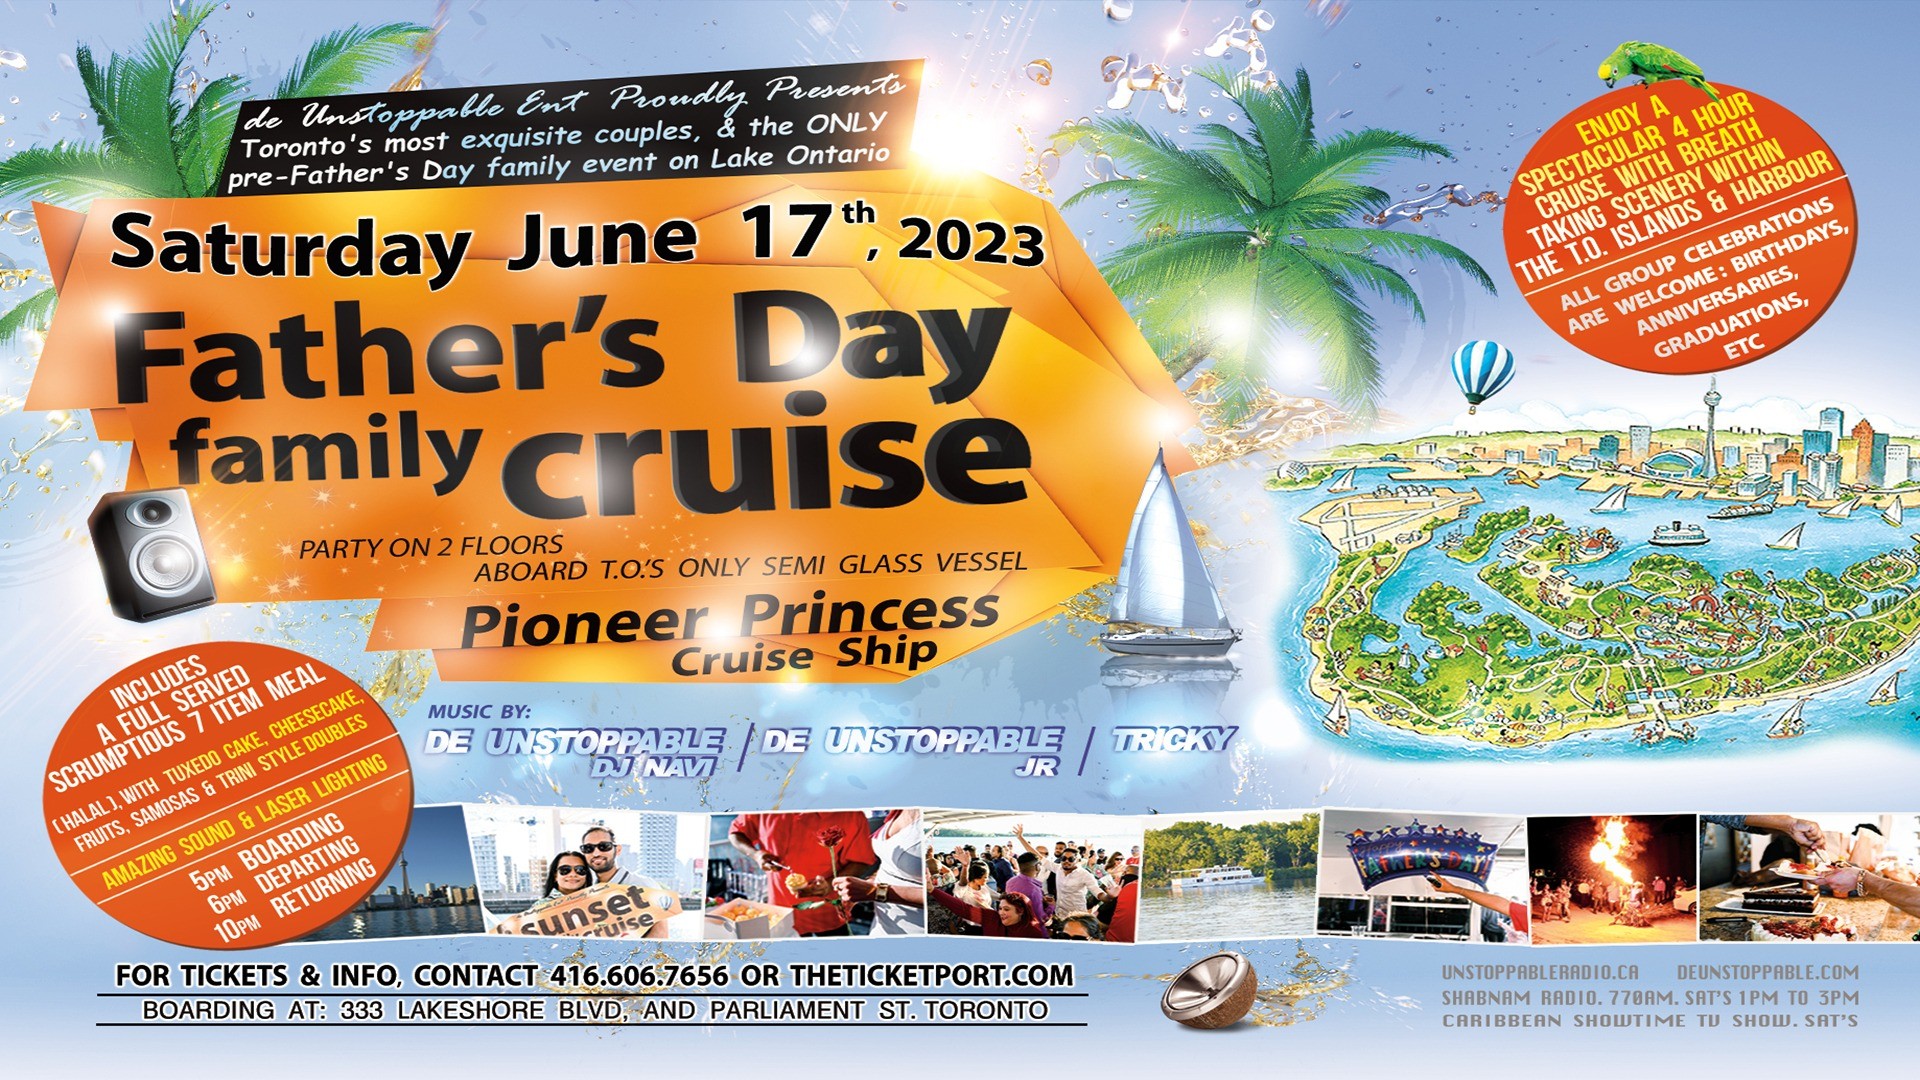 DeUnstoppable Ent Presents Father's Day Family Cruise